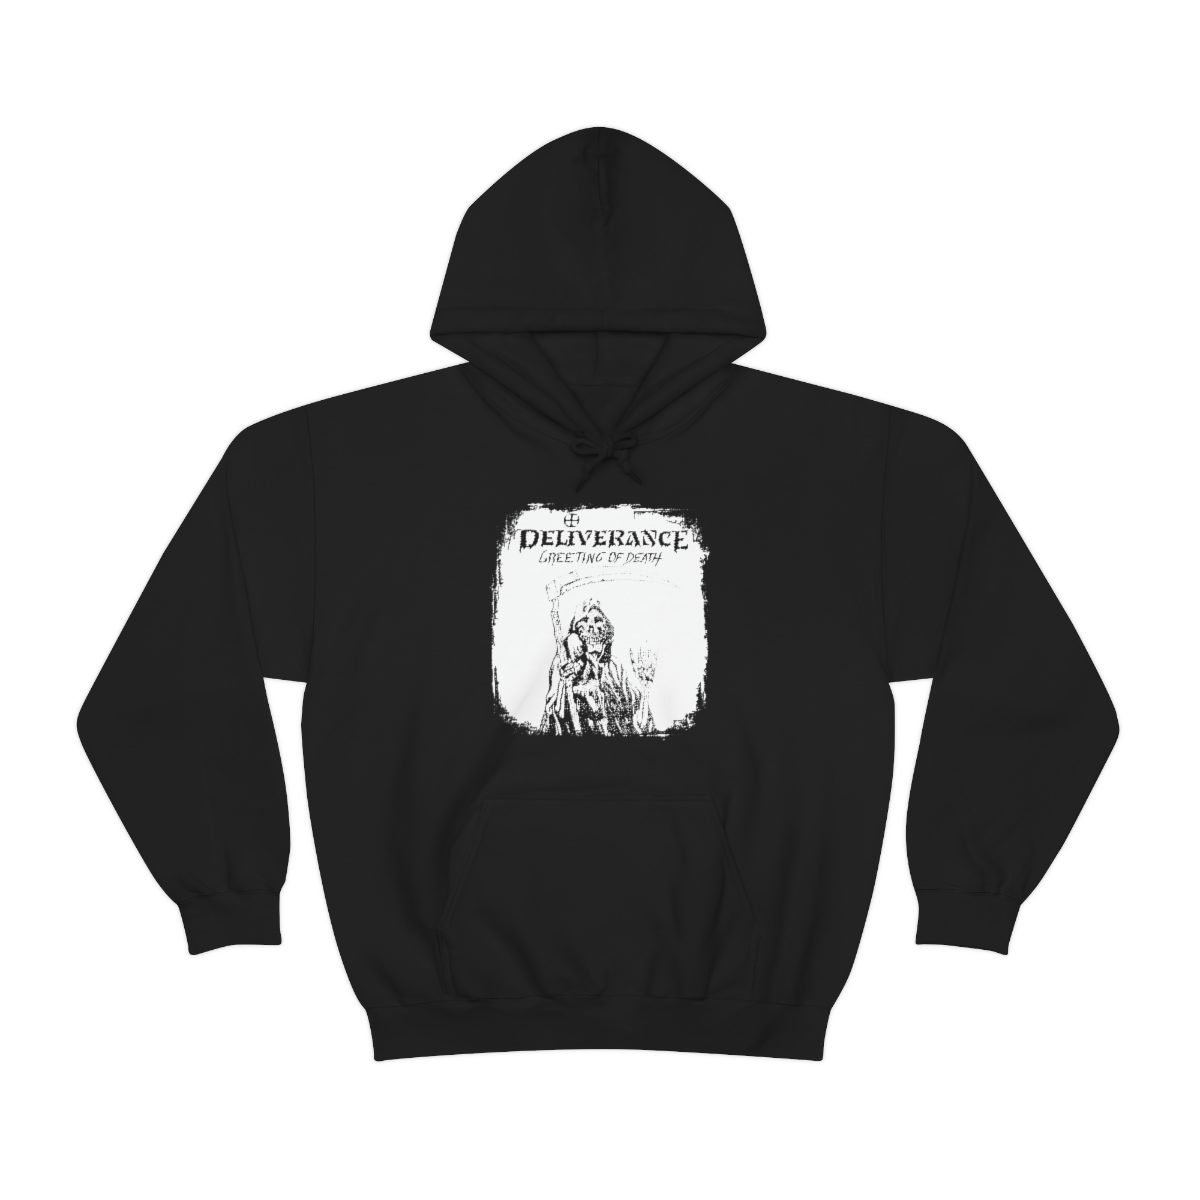 Deliverance – Greetings of Death Pullover Hooded Sweatshirt 1 Sided